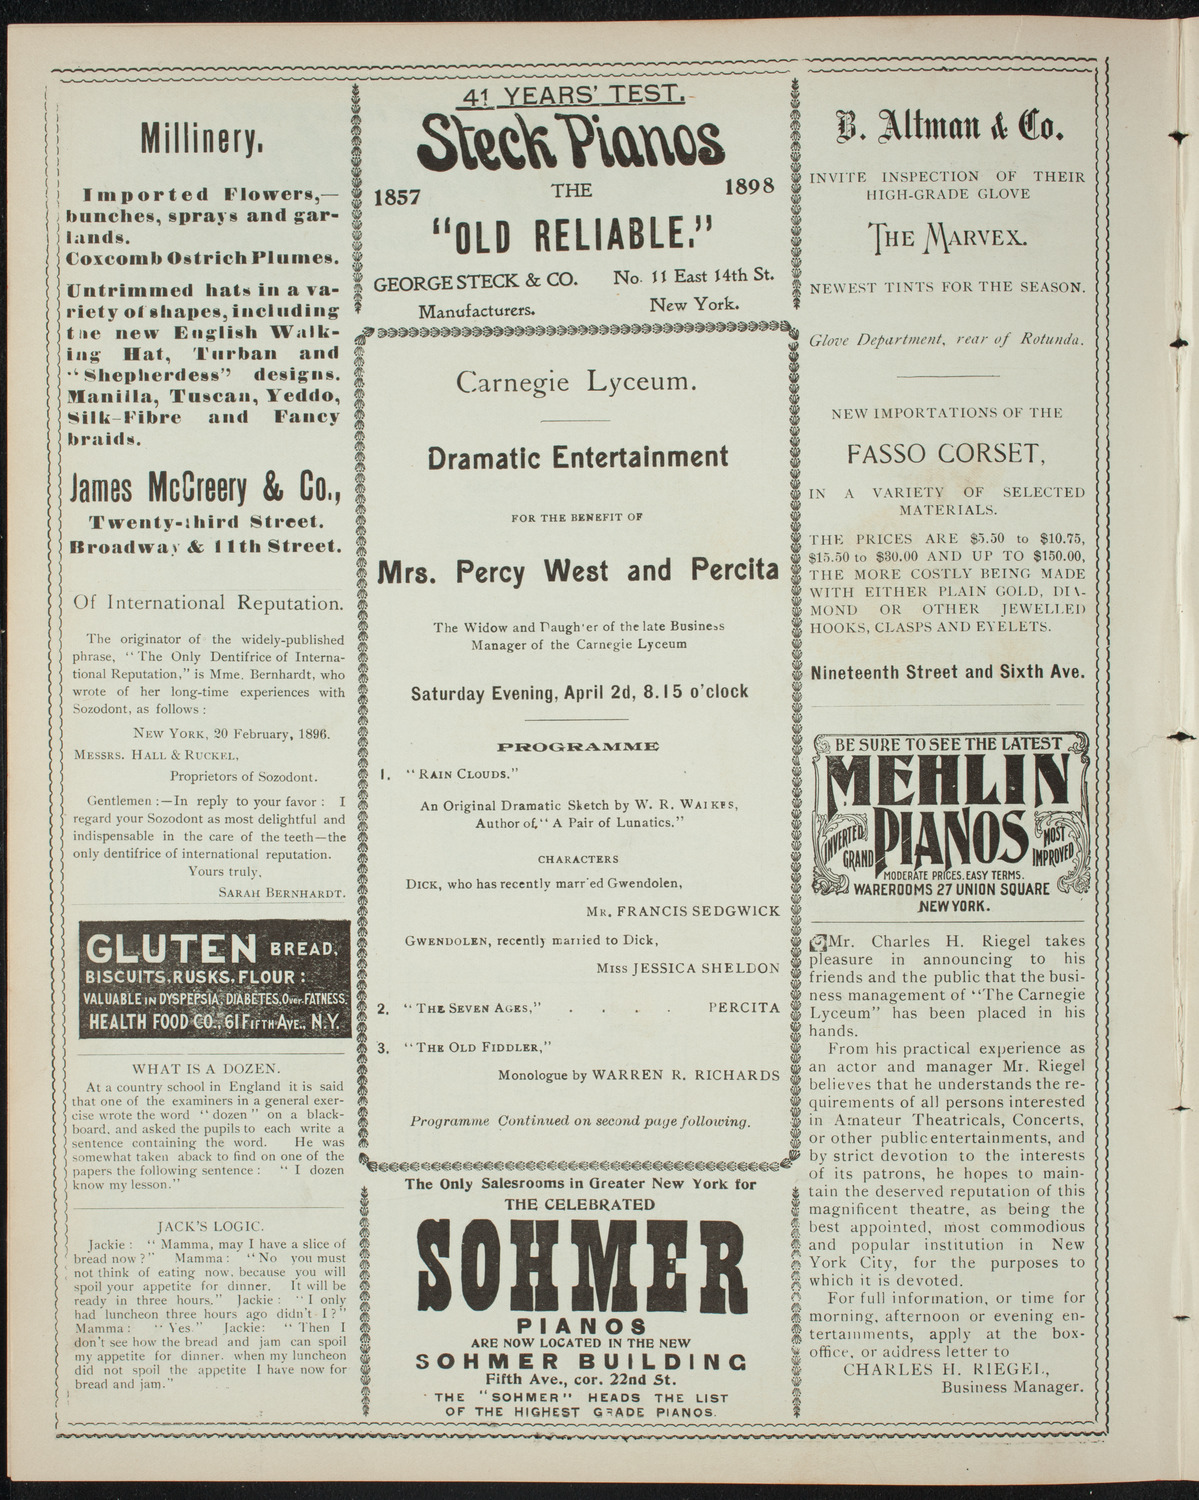 Benefit: Mrs. Percy West and Percita, April 2, 1898, program page 4